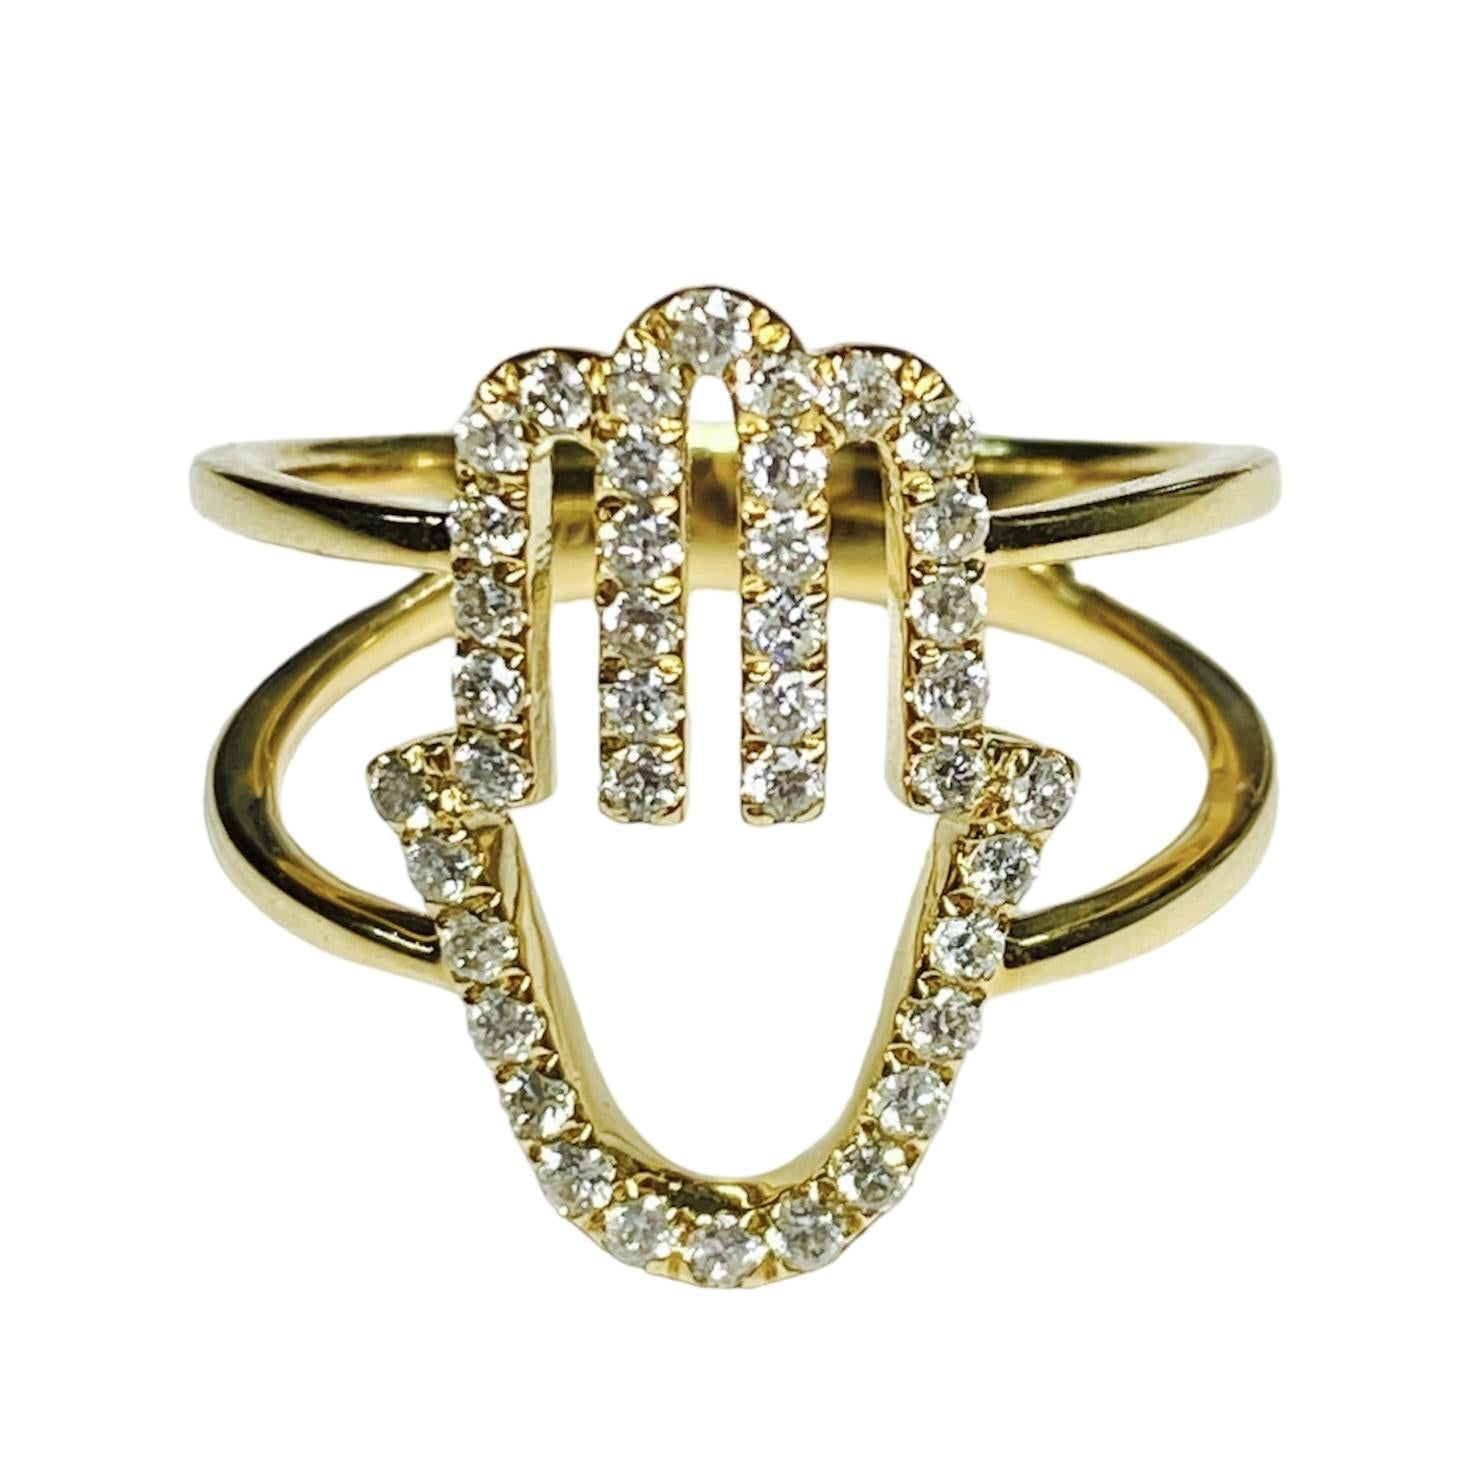 14K Hamsa Diamond Ring is a captivating and spiritually significant piece of jewelry that seamlessly blends cultural symbolism with luxurious design.
Crafted from high-quality 14-karat gold,
This ring features the iconic Hamsa symbol, known for its